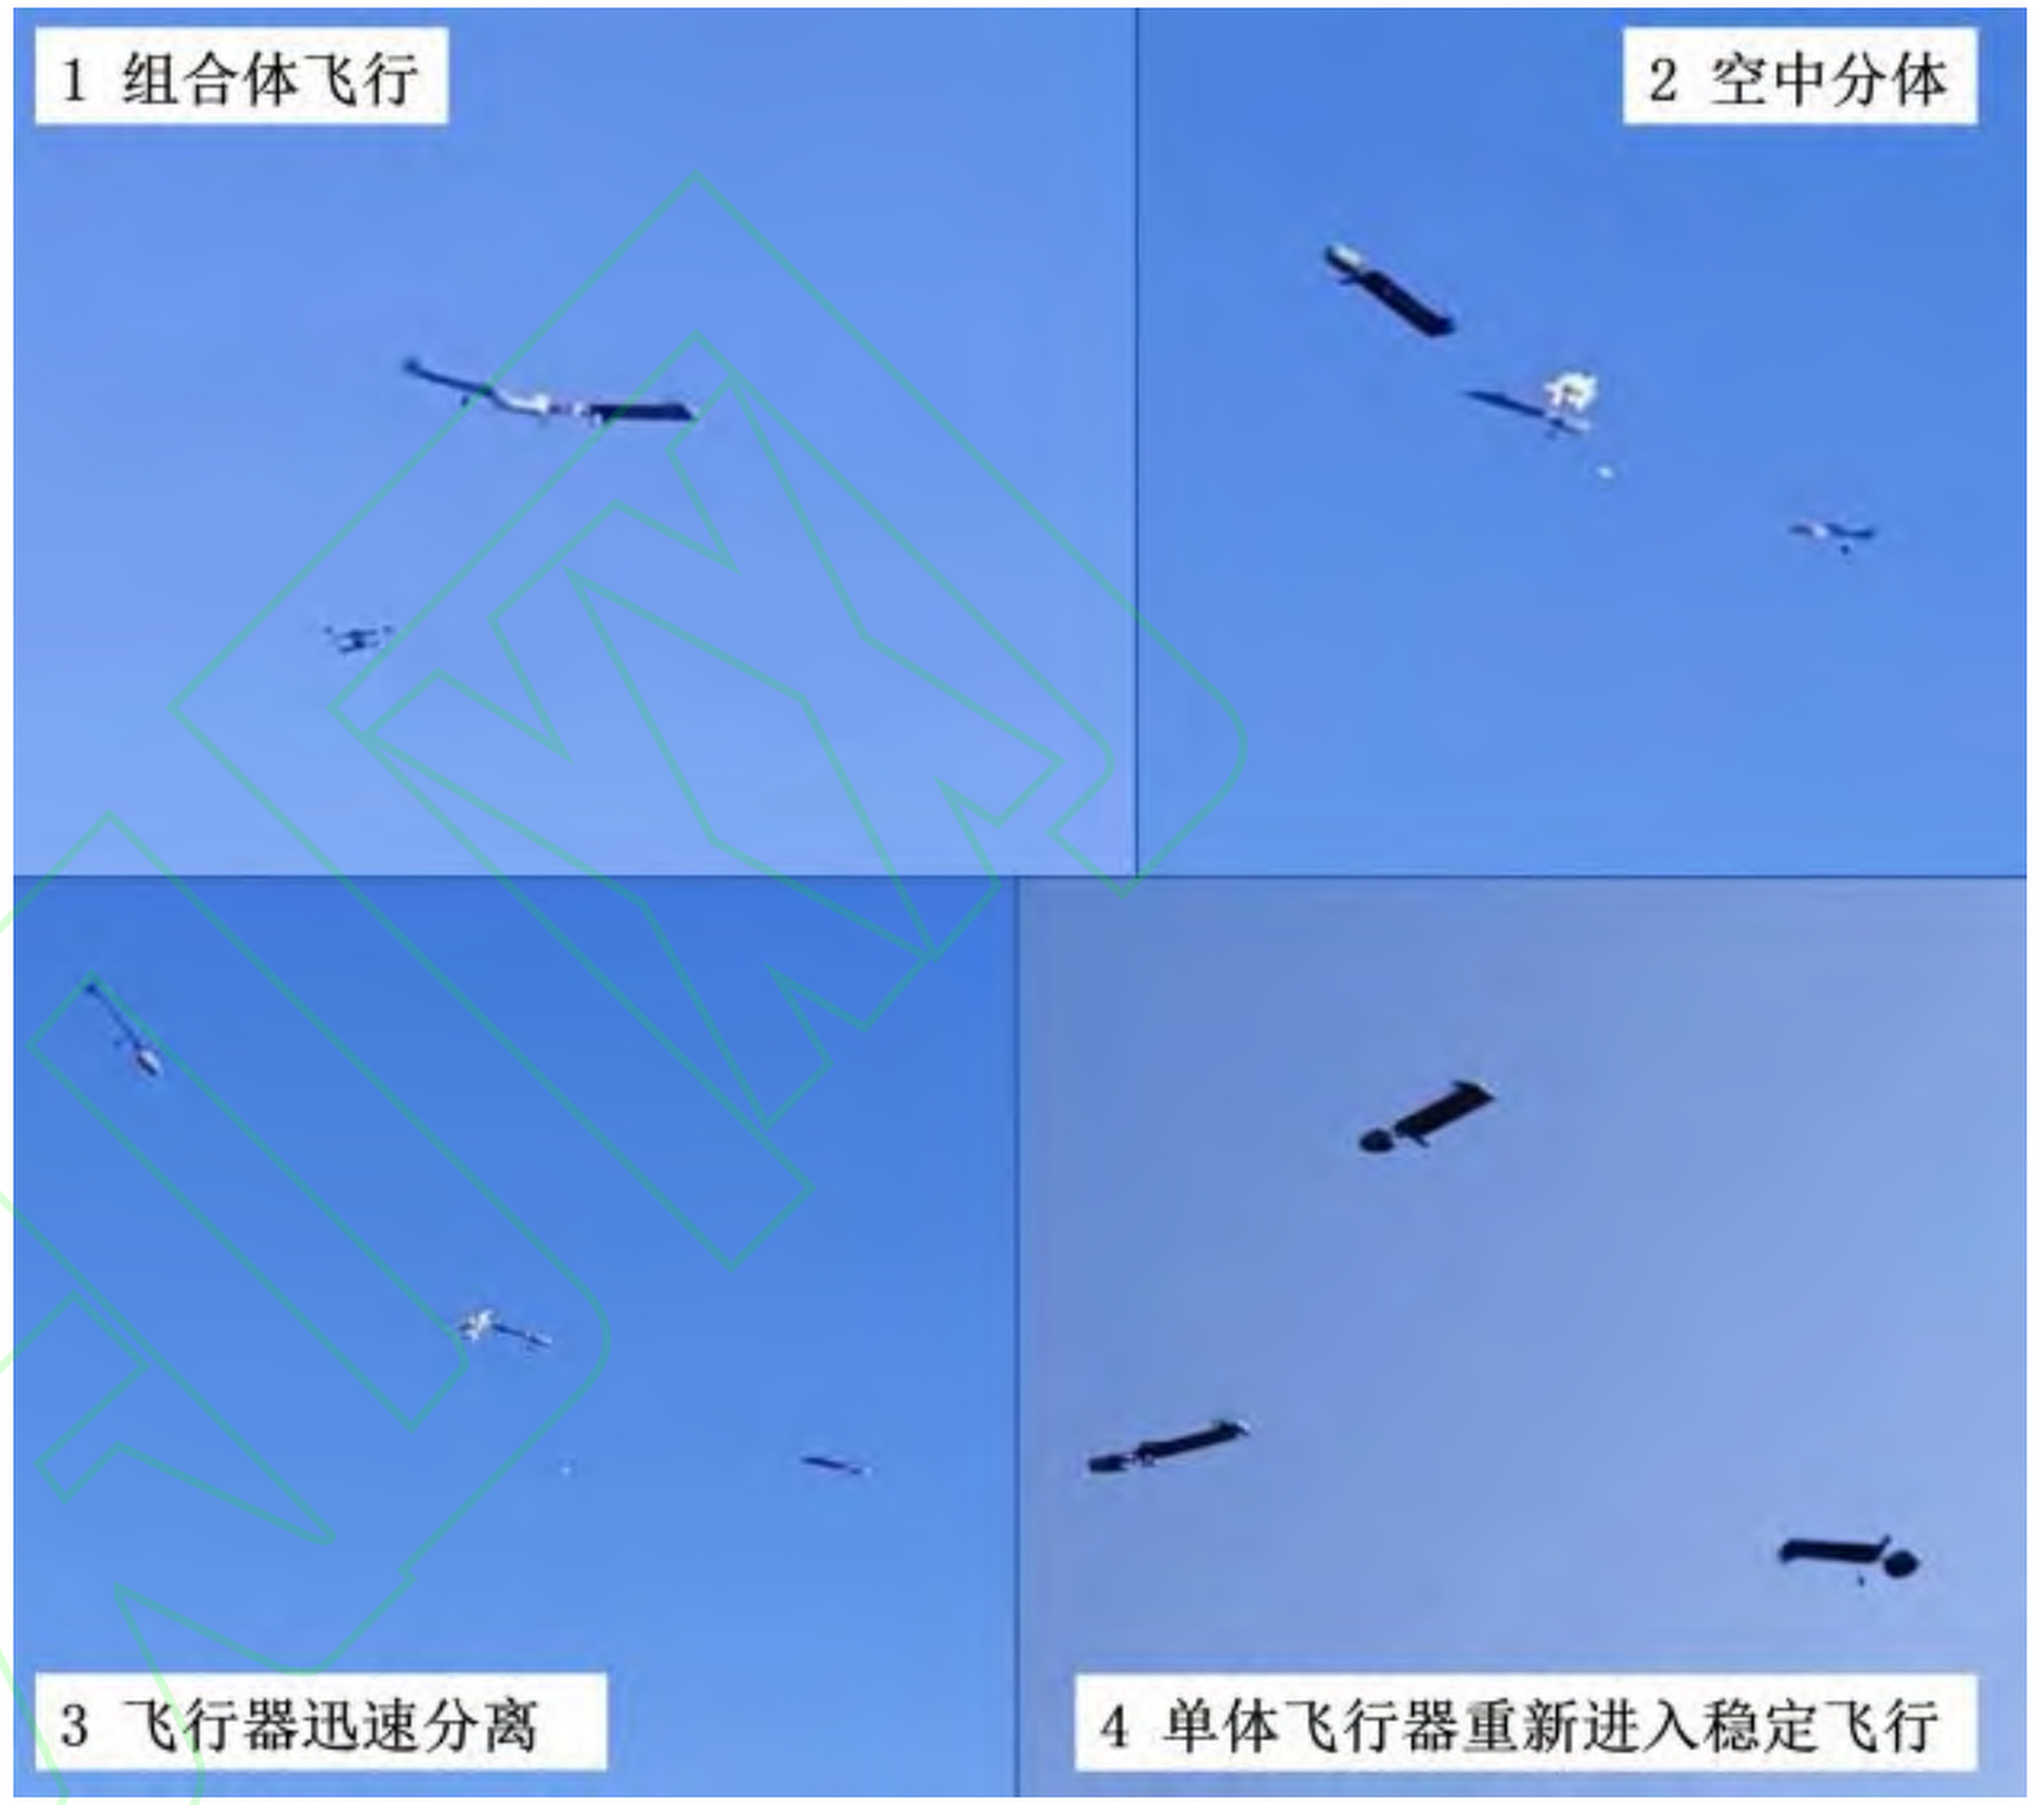 Chinese scientists report they have developed a drone that can rapidly split apart. Photo: Nanjing University of Aeronautics and Astronautics